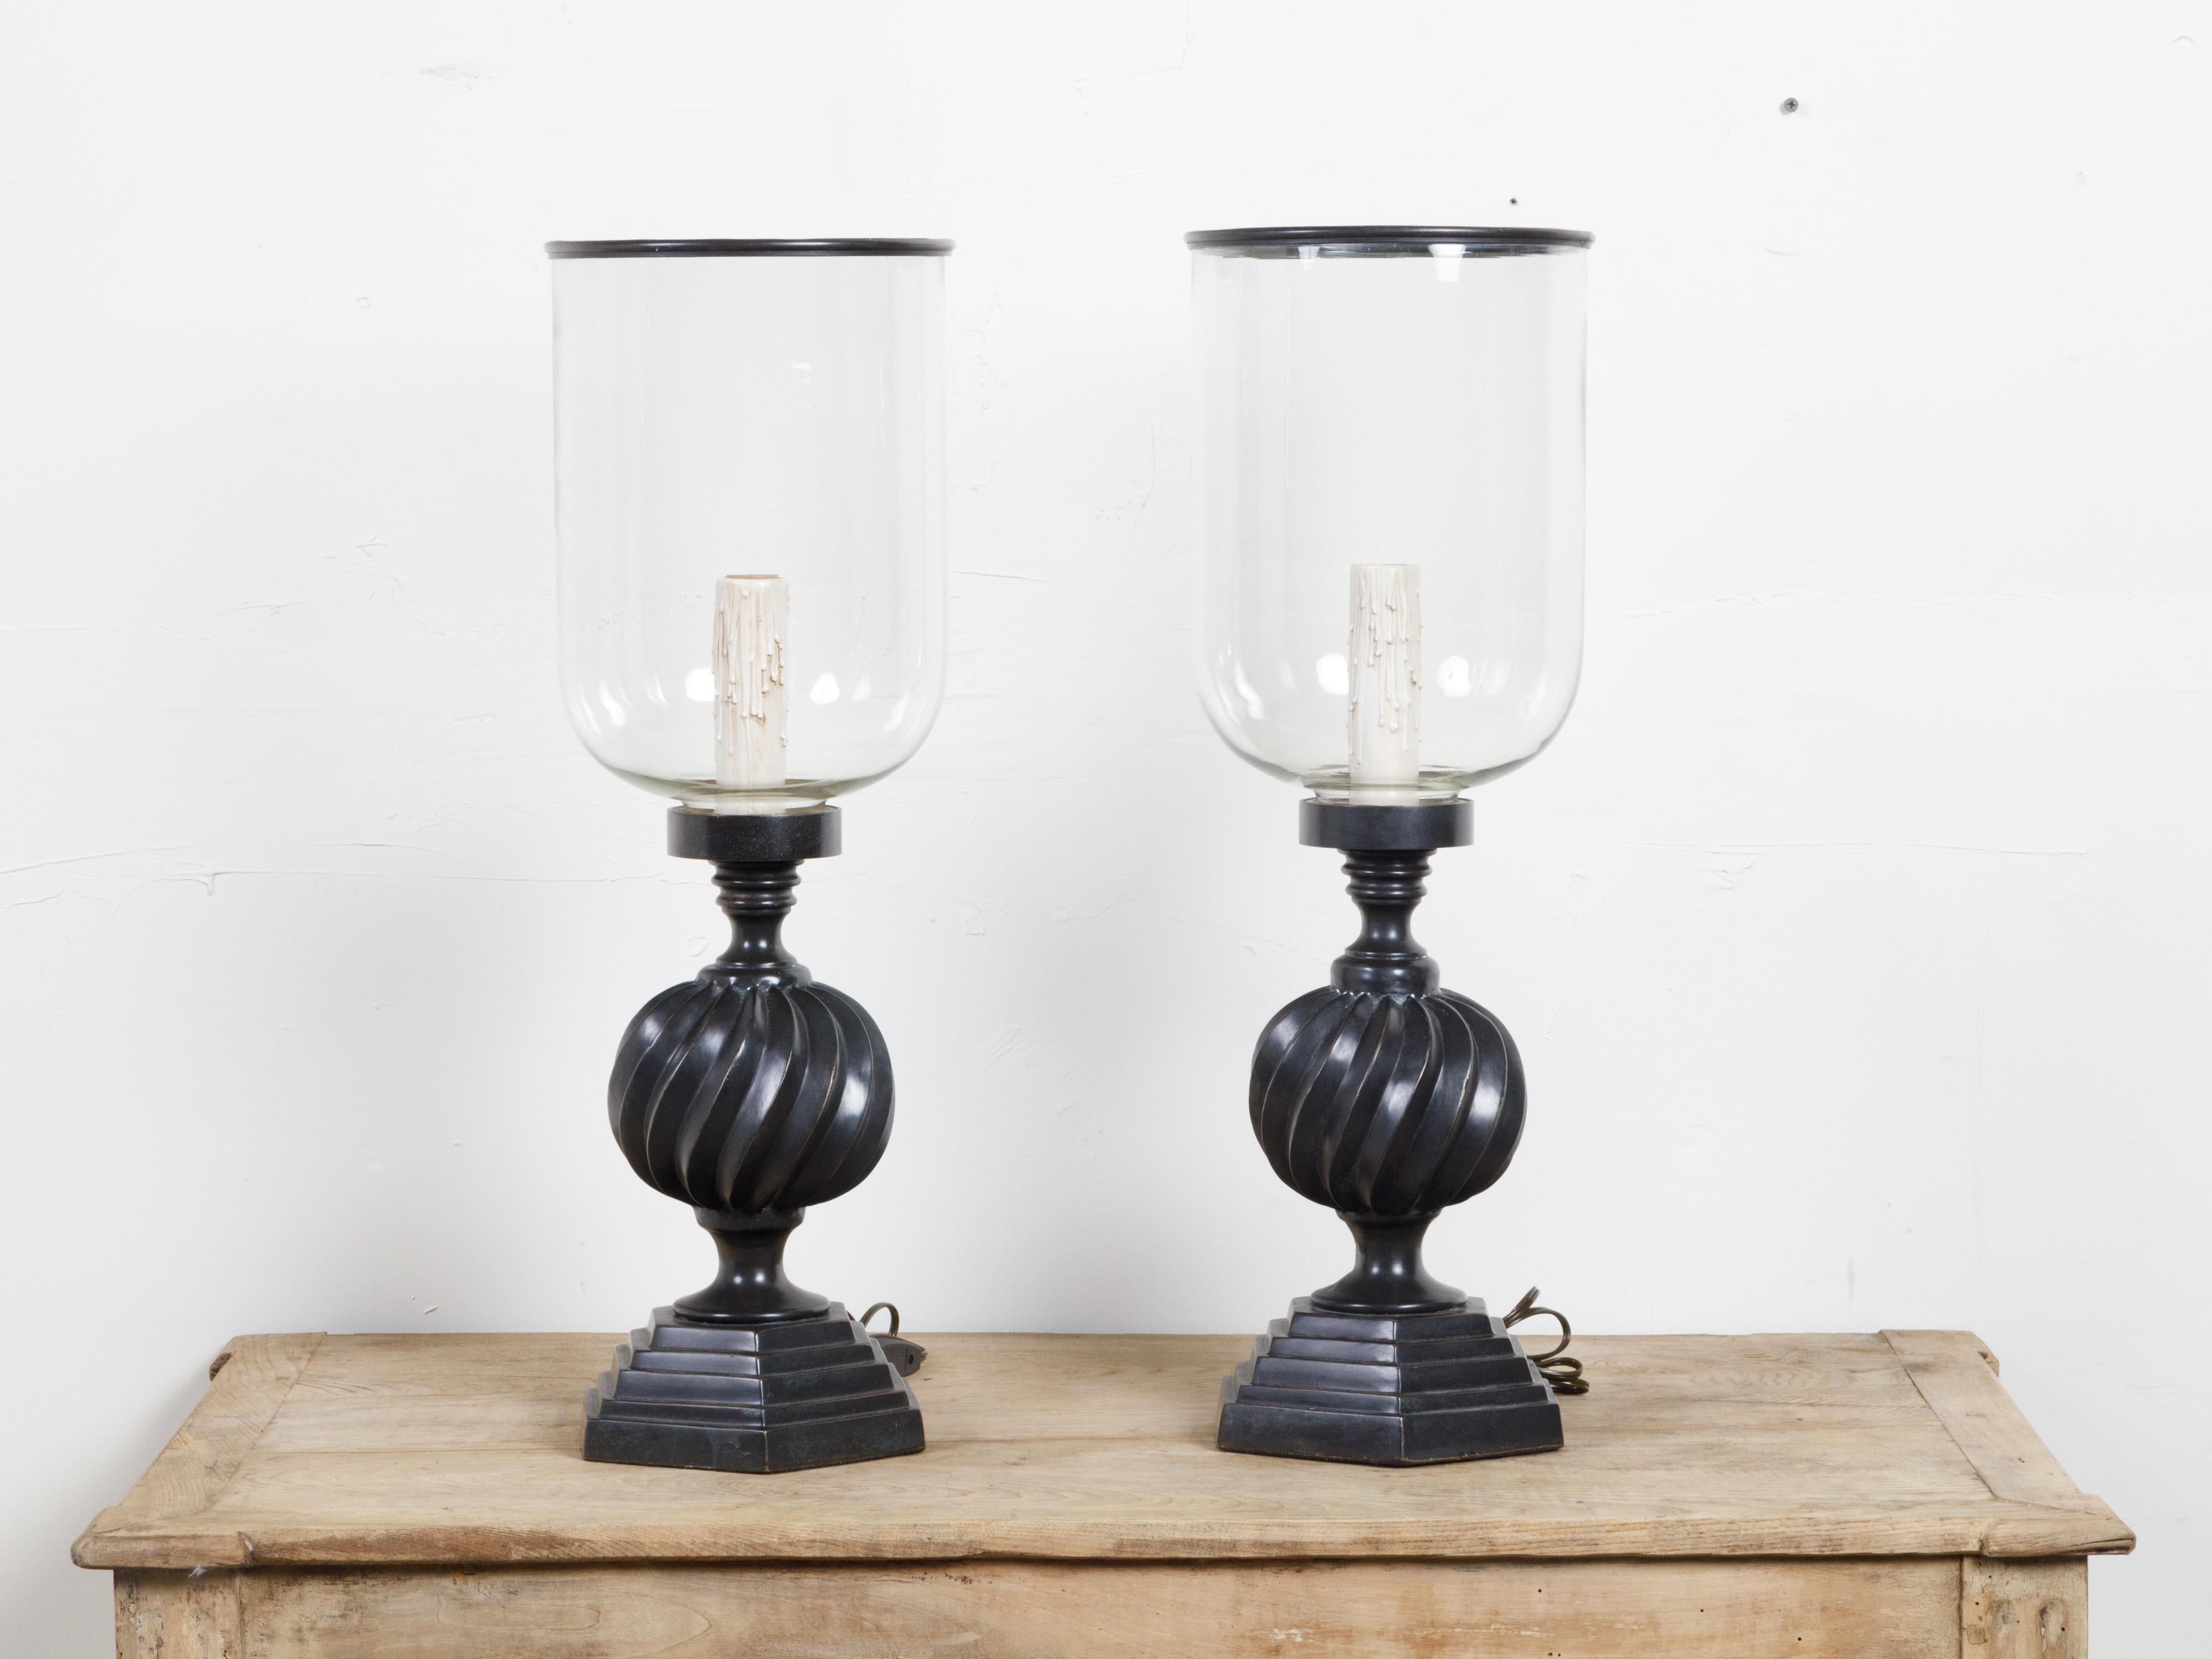 A pair of French vintage bronze hurricane table lamps from the mid 20th century, with single light, twisted motifs and stepped bases. Created in France during the midcentury period, each of this pair of hurricane lamps features a glass container